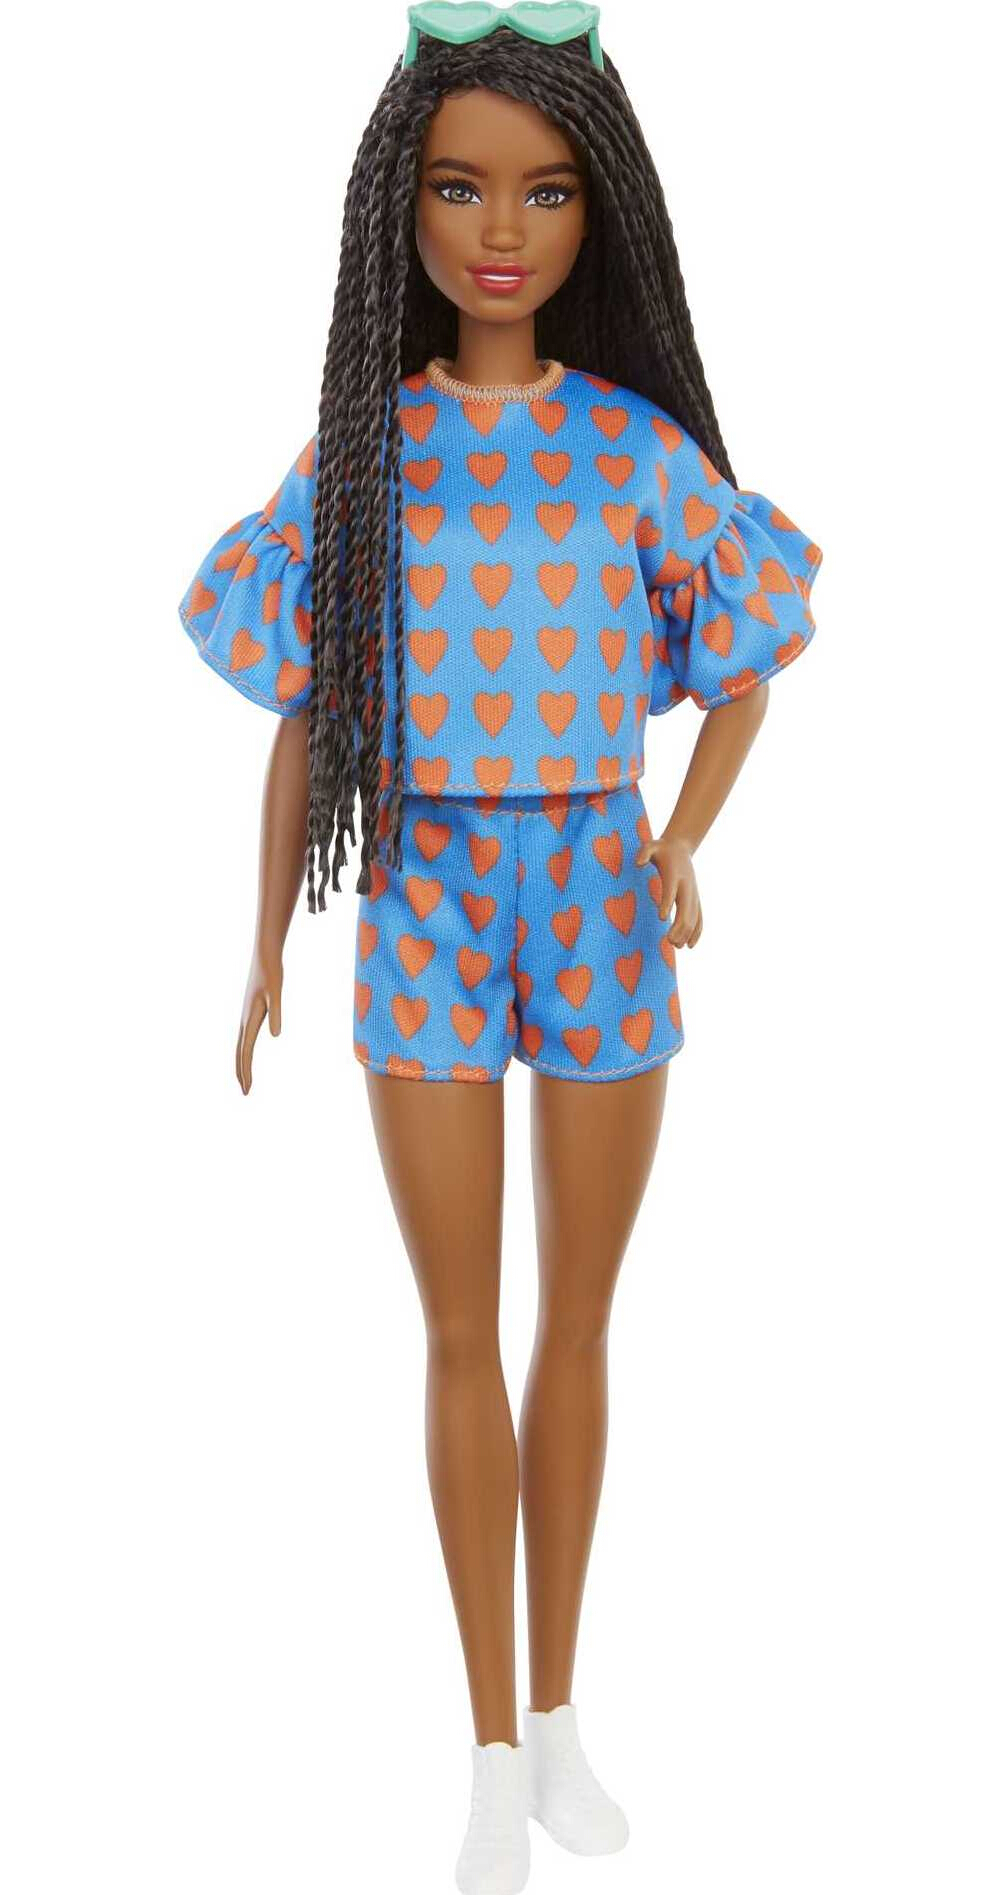 Barbie Fashionistas Doll #172 in Heart Print Shirt & Shorts with Braided Hair, Sneakers & Sunglasses - image 1 of 6